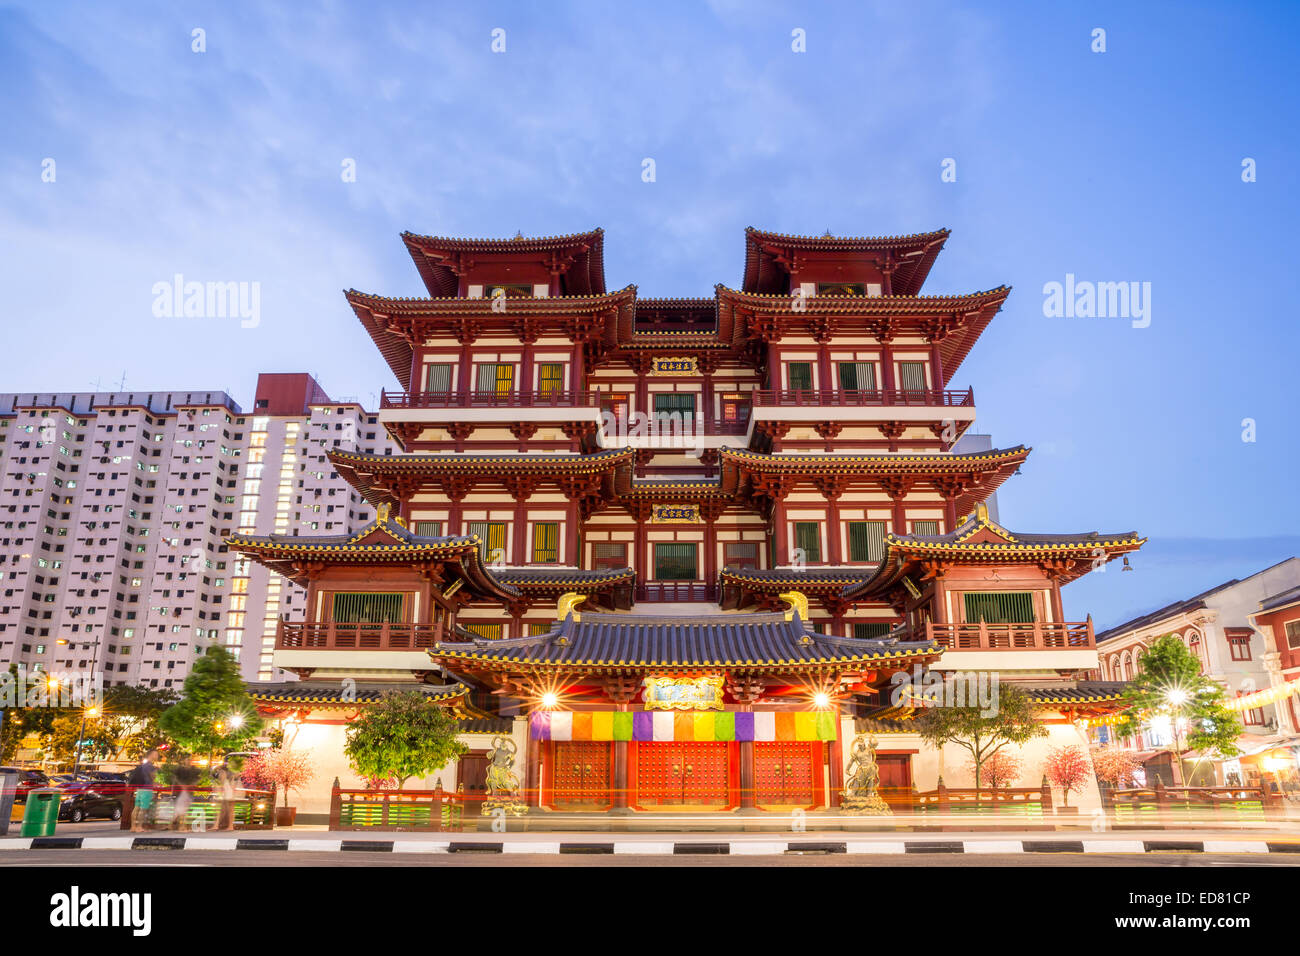 Architecture of Singapore buddha tooth relic temple at dusk Stock Photo